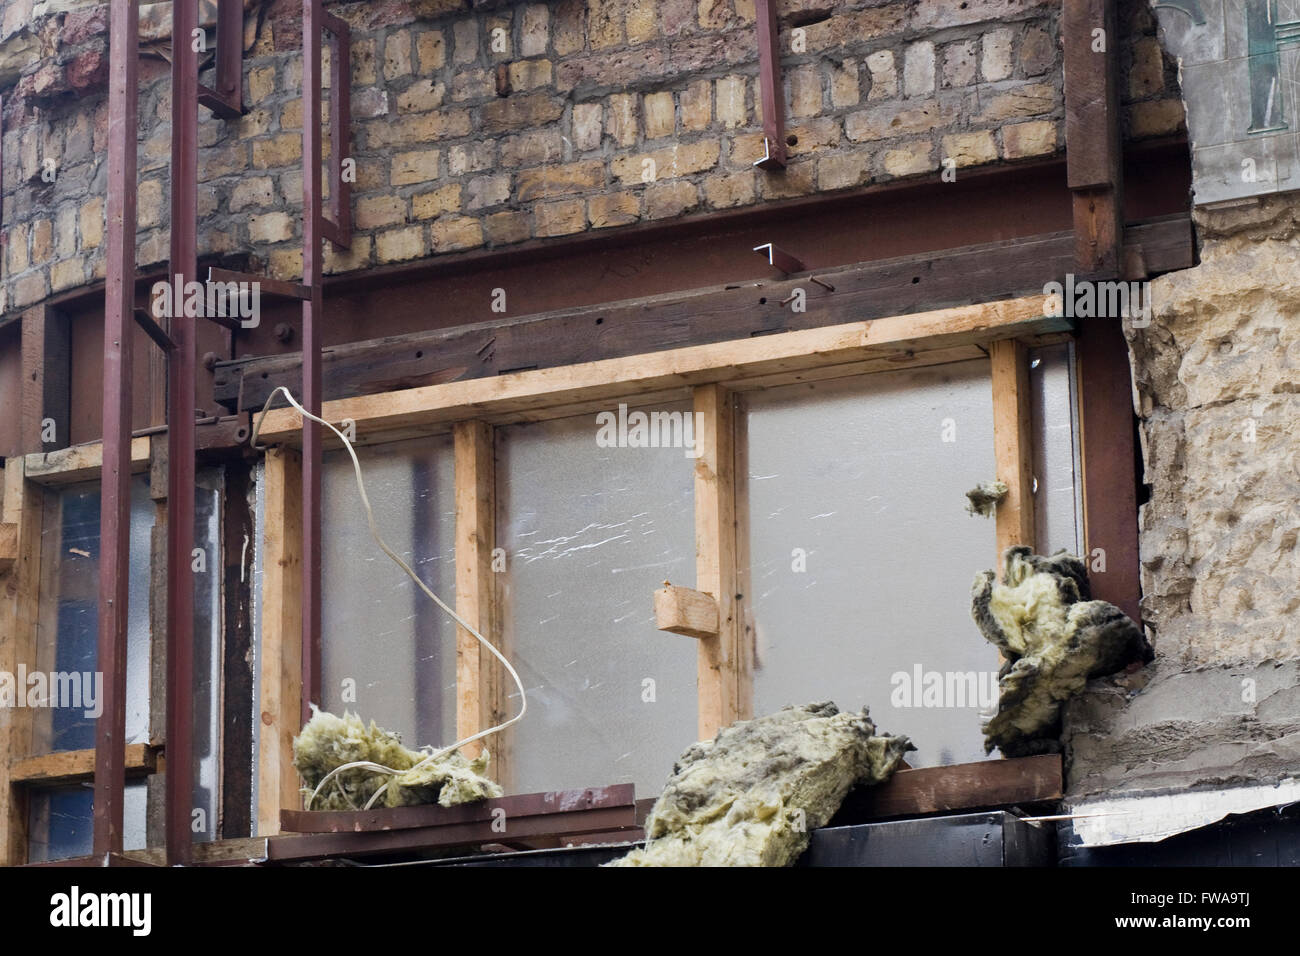 Renovation project restoring an old shop in Brick lane London Stock Photo